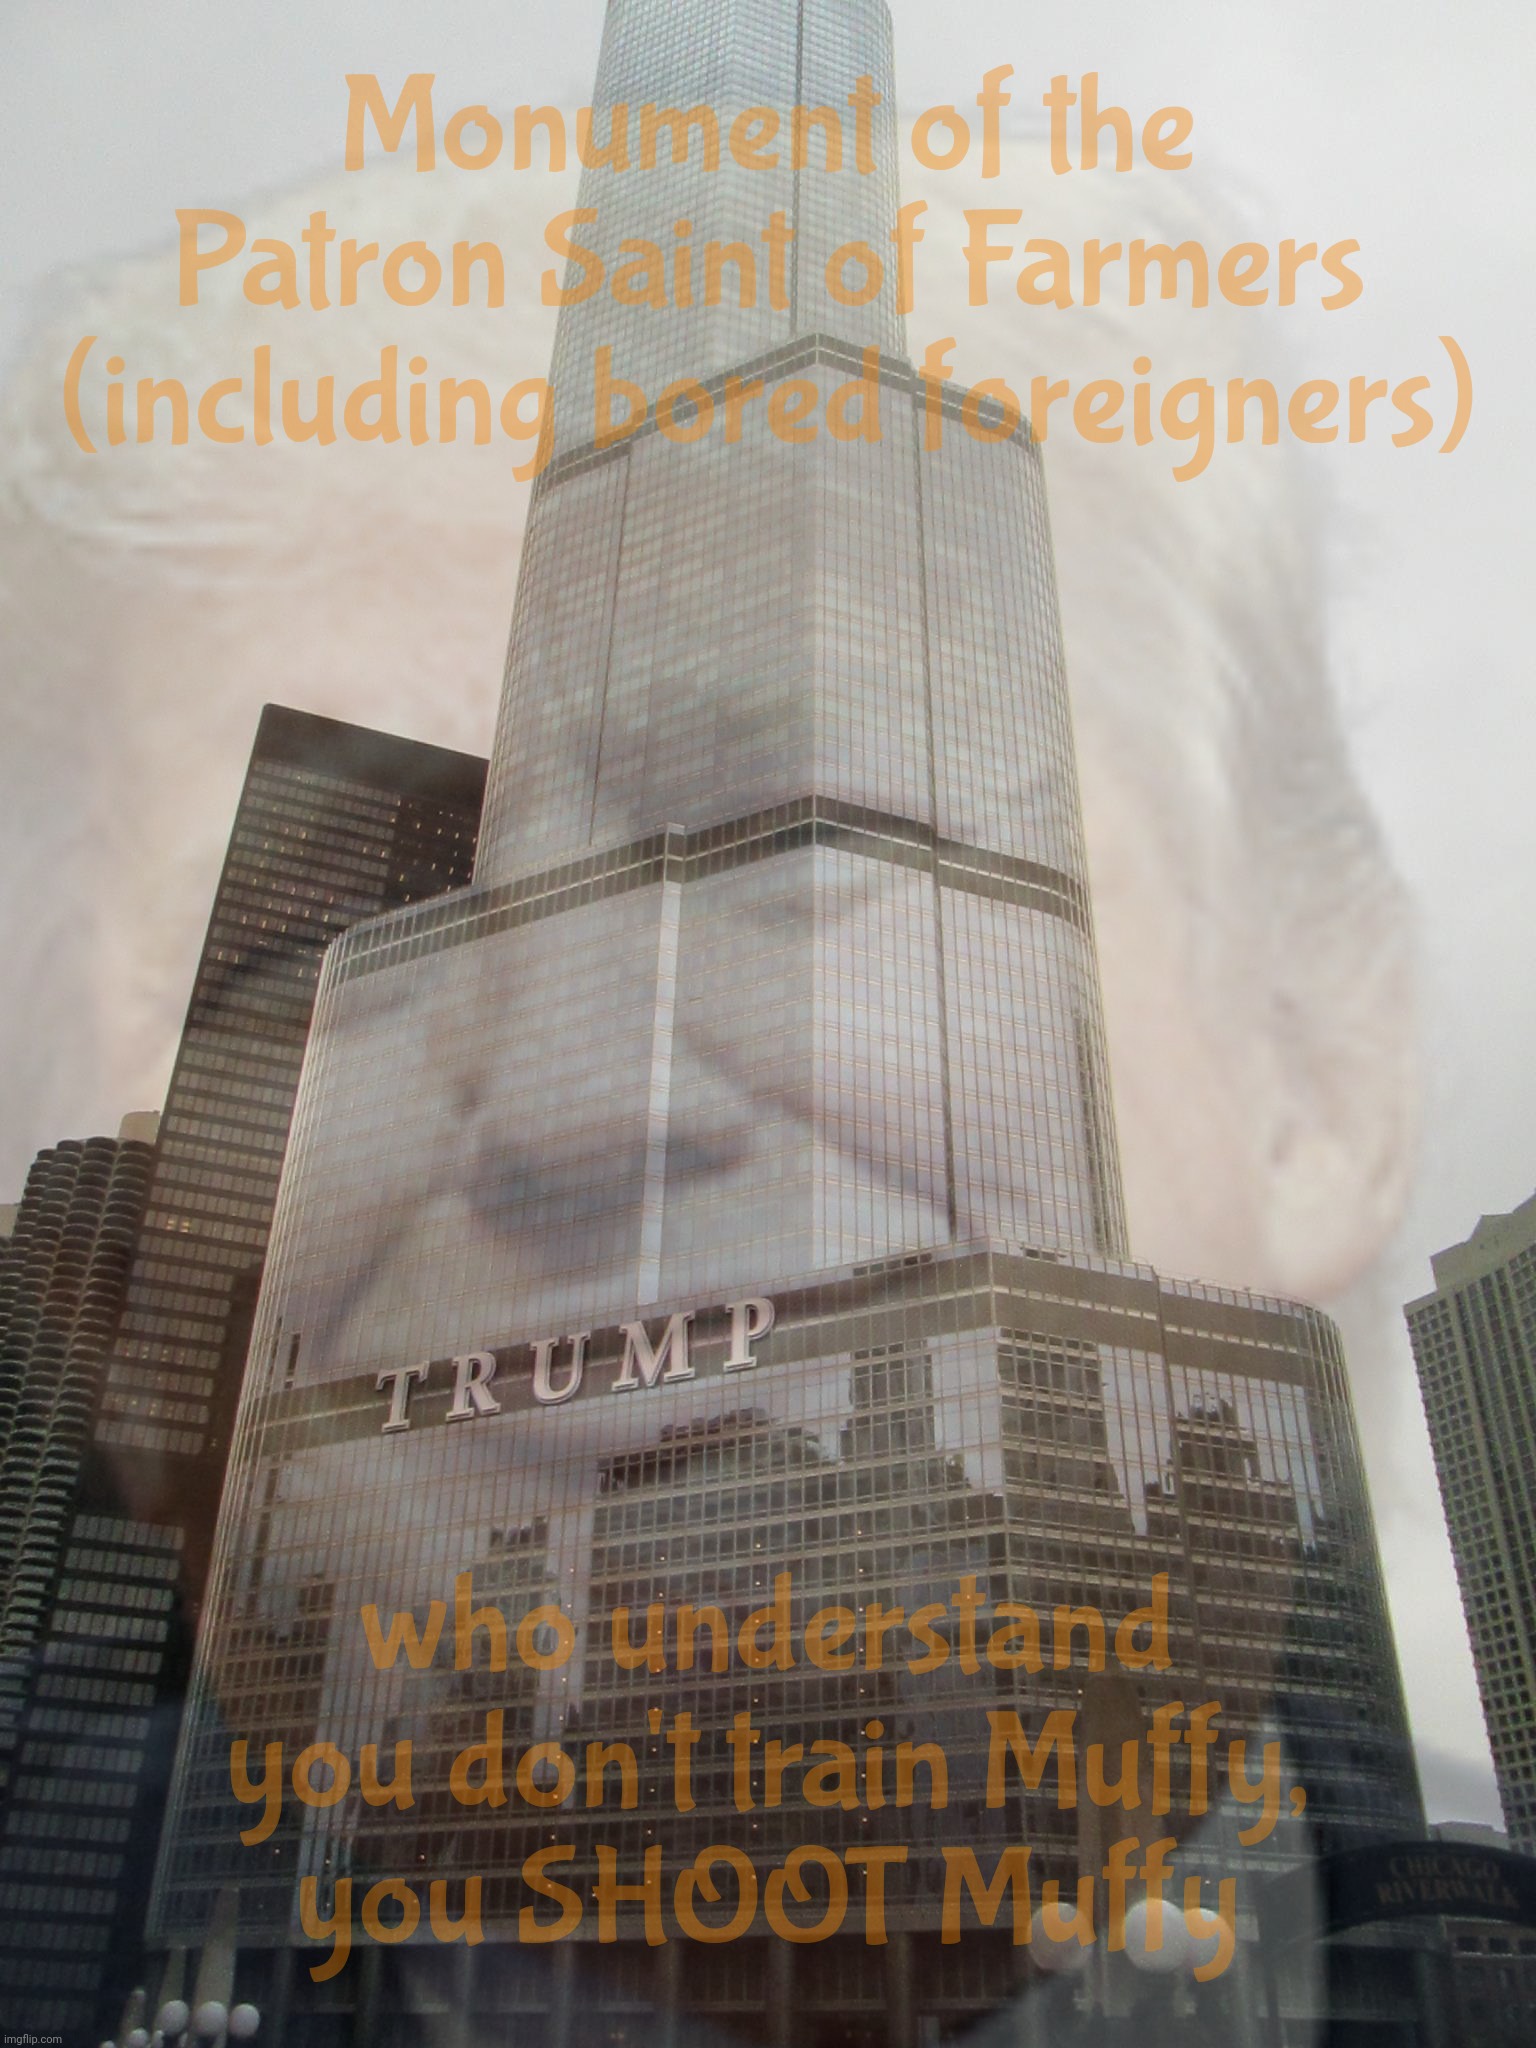 If you can't even train your own dog slave, maybe you shouldn't have any. In fact, no one should | Monument of the Patron Saint of Farmers
(including bored foreigners); who understand you don't train Muffy,
you SHOOT Muffy | image tagged in trump tower,trump,donald trump,patron saint of rural folks,kristi noem,get another hobby | made w/ Imgflip meme maker